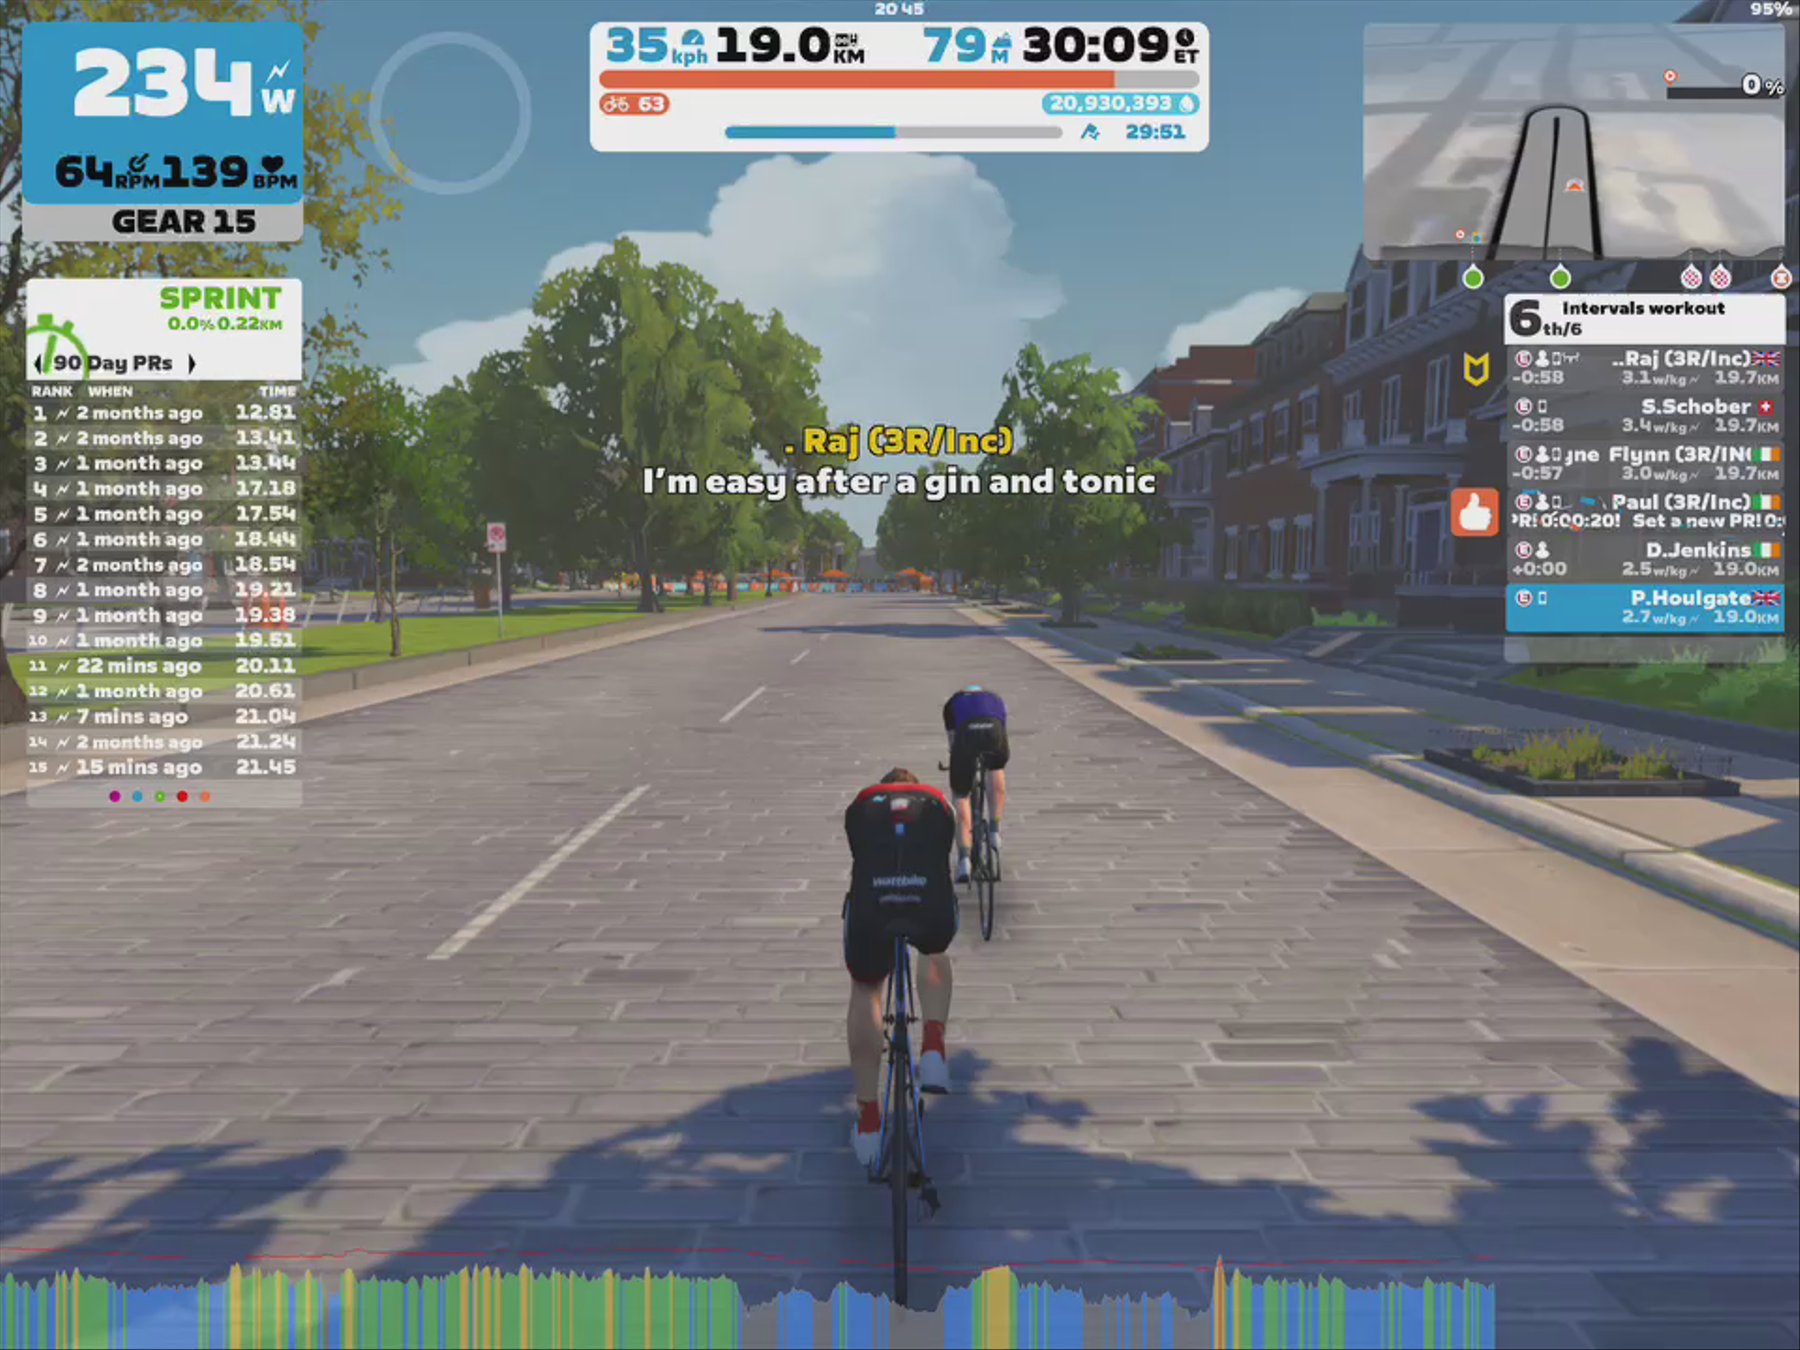 Zwift - Group Ride: Intervals workout on The Fan Flats in Richmond